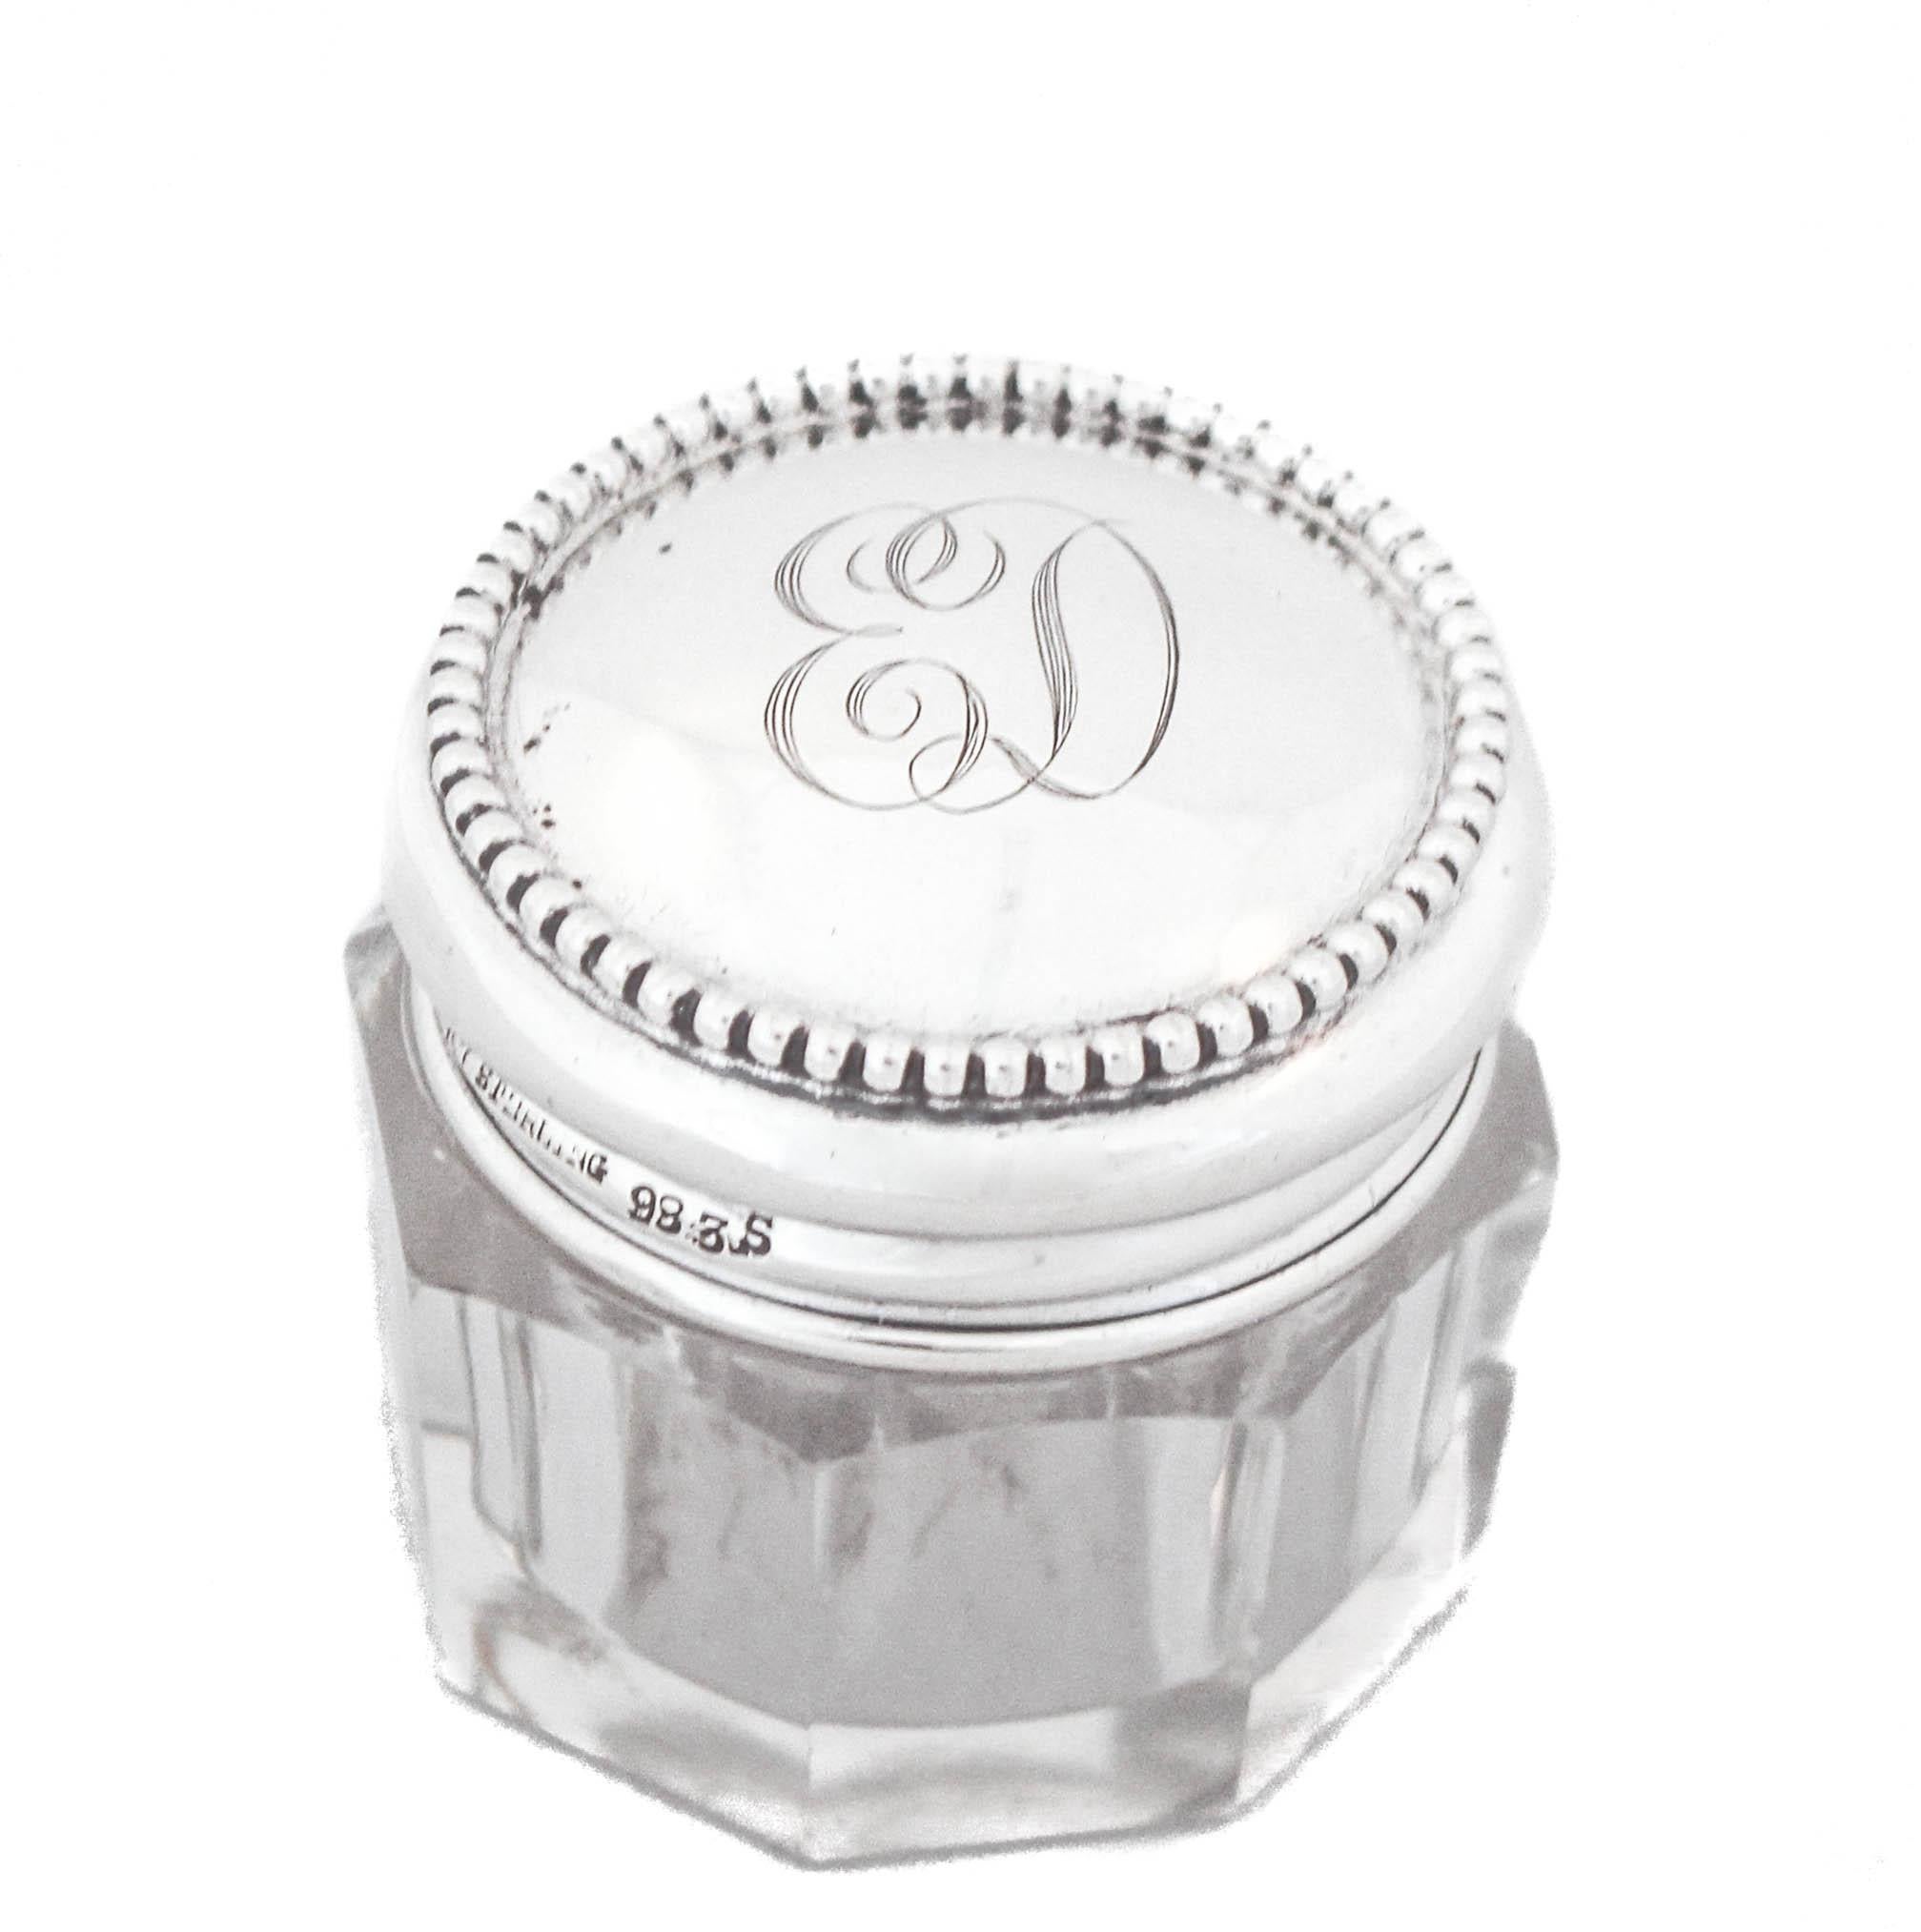 Being offered is a sterling silver and crystal vanity jar.  The silver cover has a row of beading around the rim — very common in Art Deco designs.  The crystal jar is paneled rather than a single round shape— again common in Art Deco design.  These